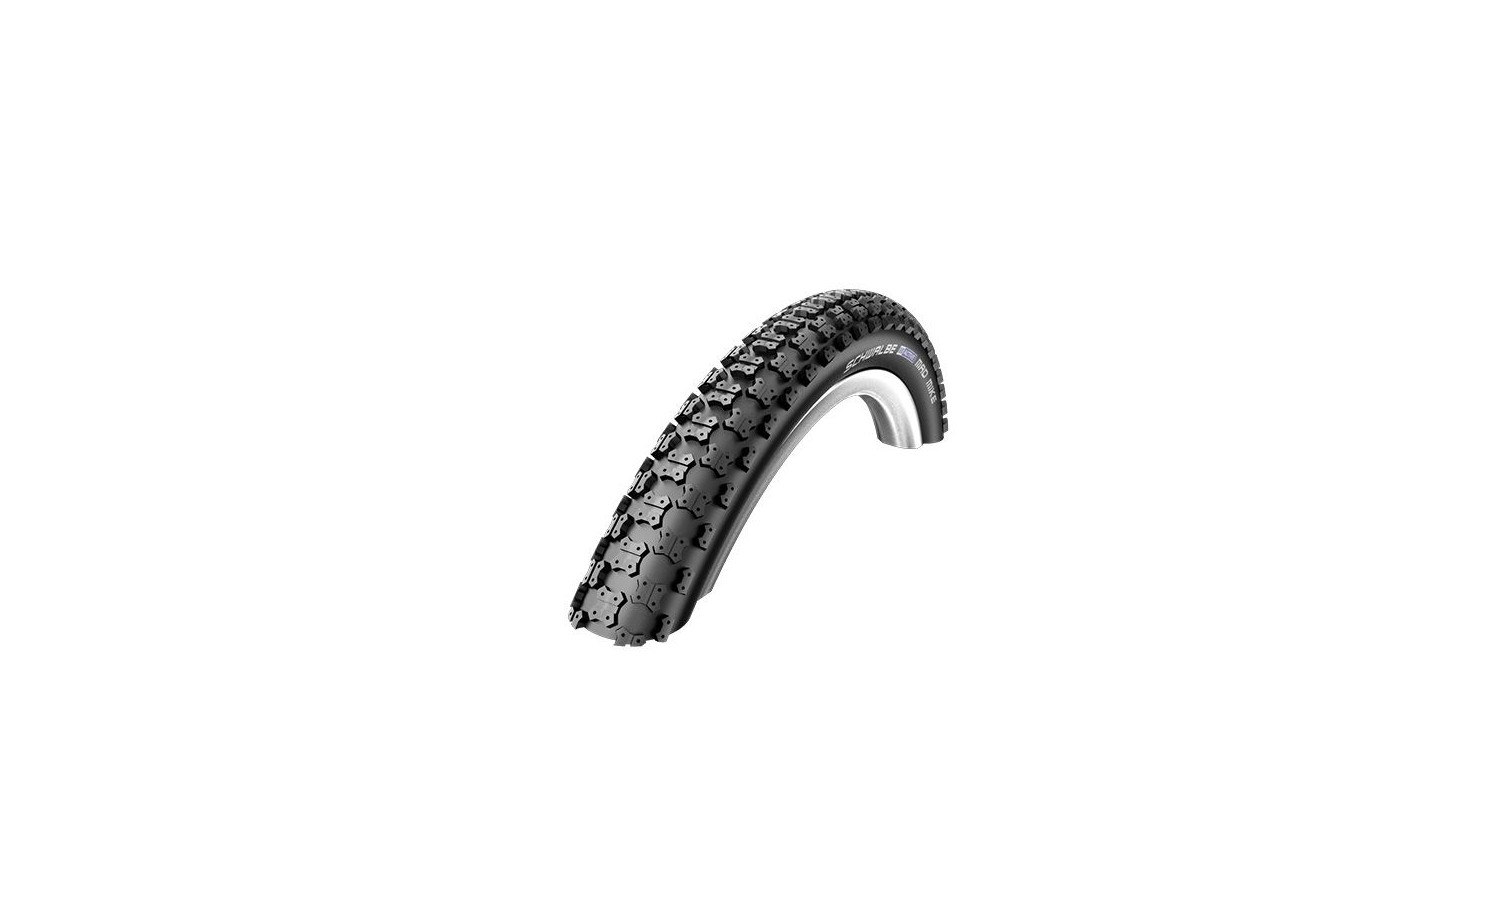 Tire 20" Schwalbe Mad Mike 20x2.125 (57-406)